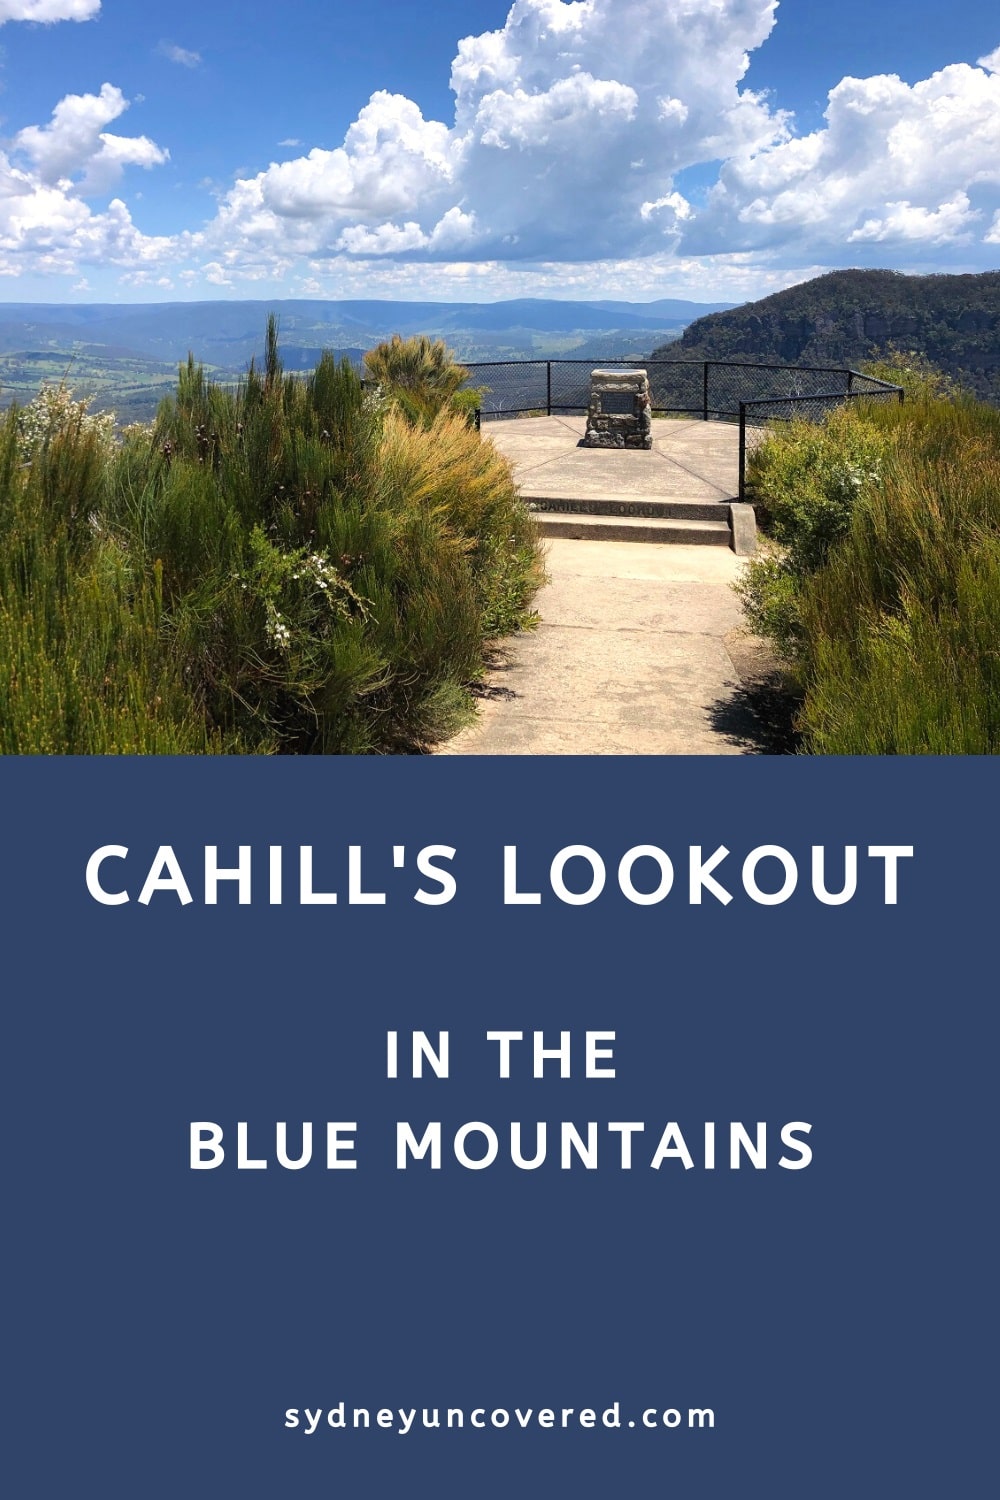 Cahill's Lookout in the Blue Mountains